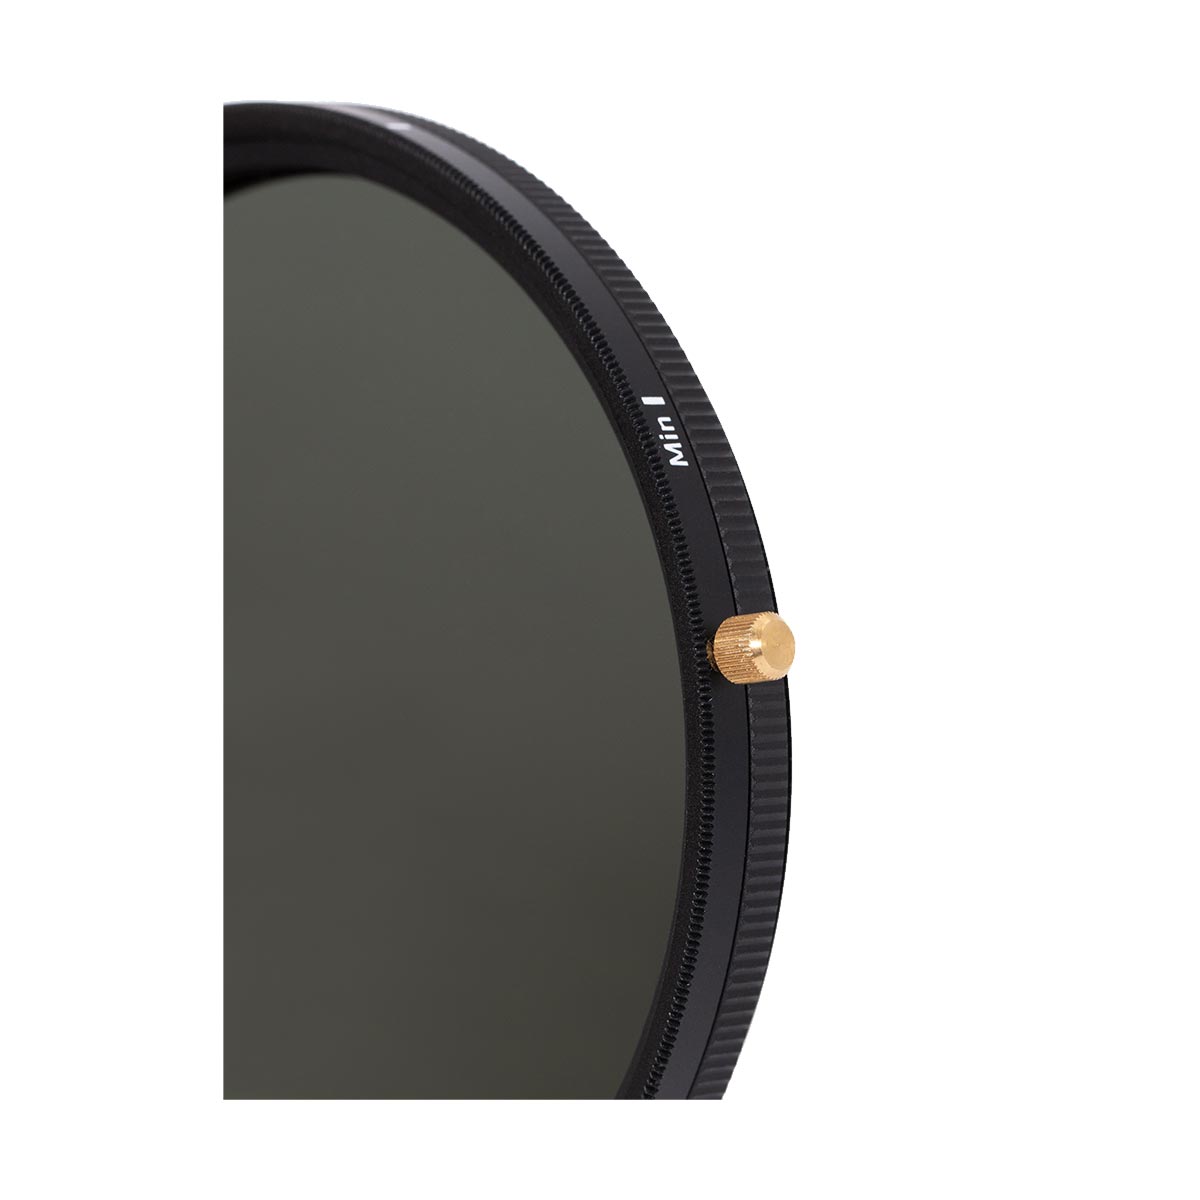 ProMaster HGX Prime 77mm Variable ND Filter (1.3 - 8 stops)